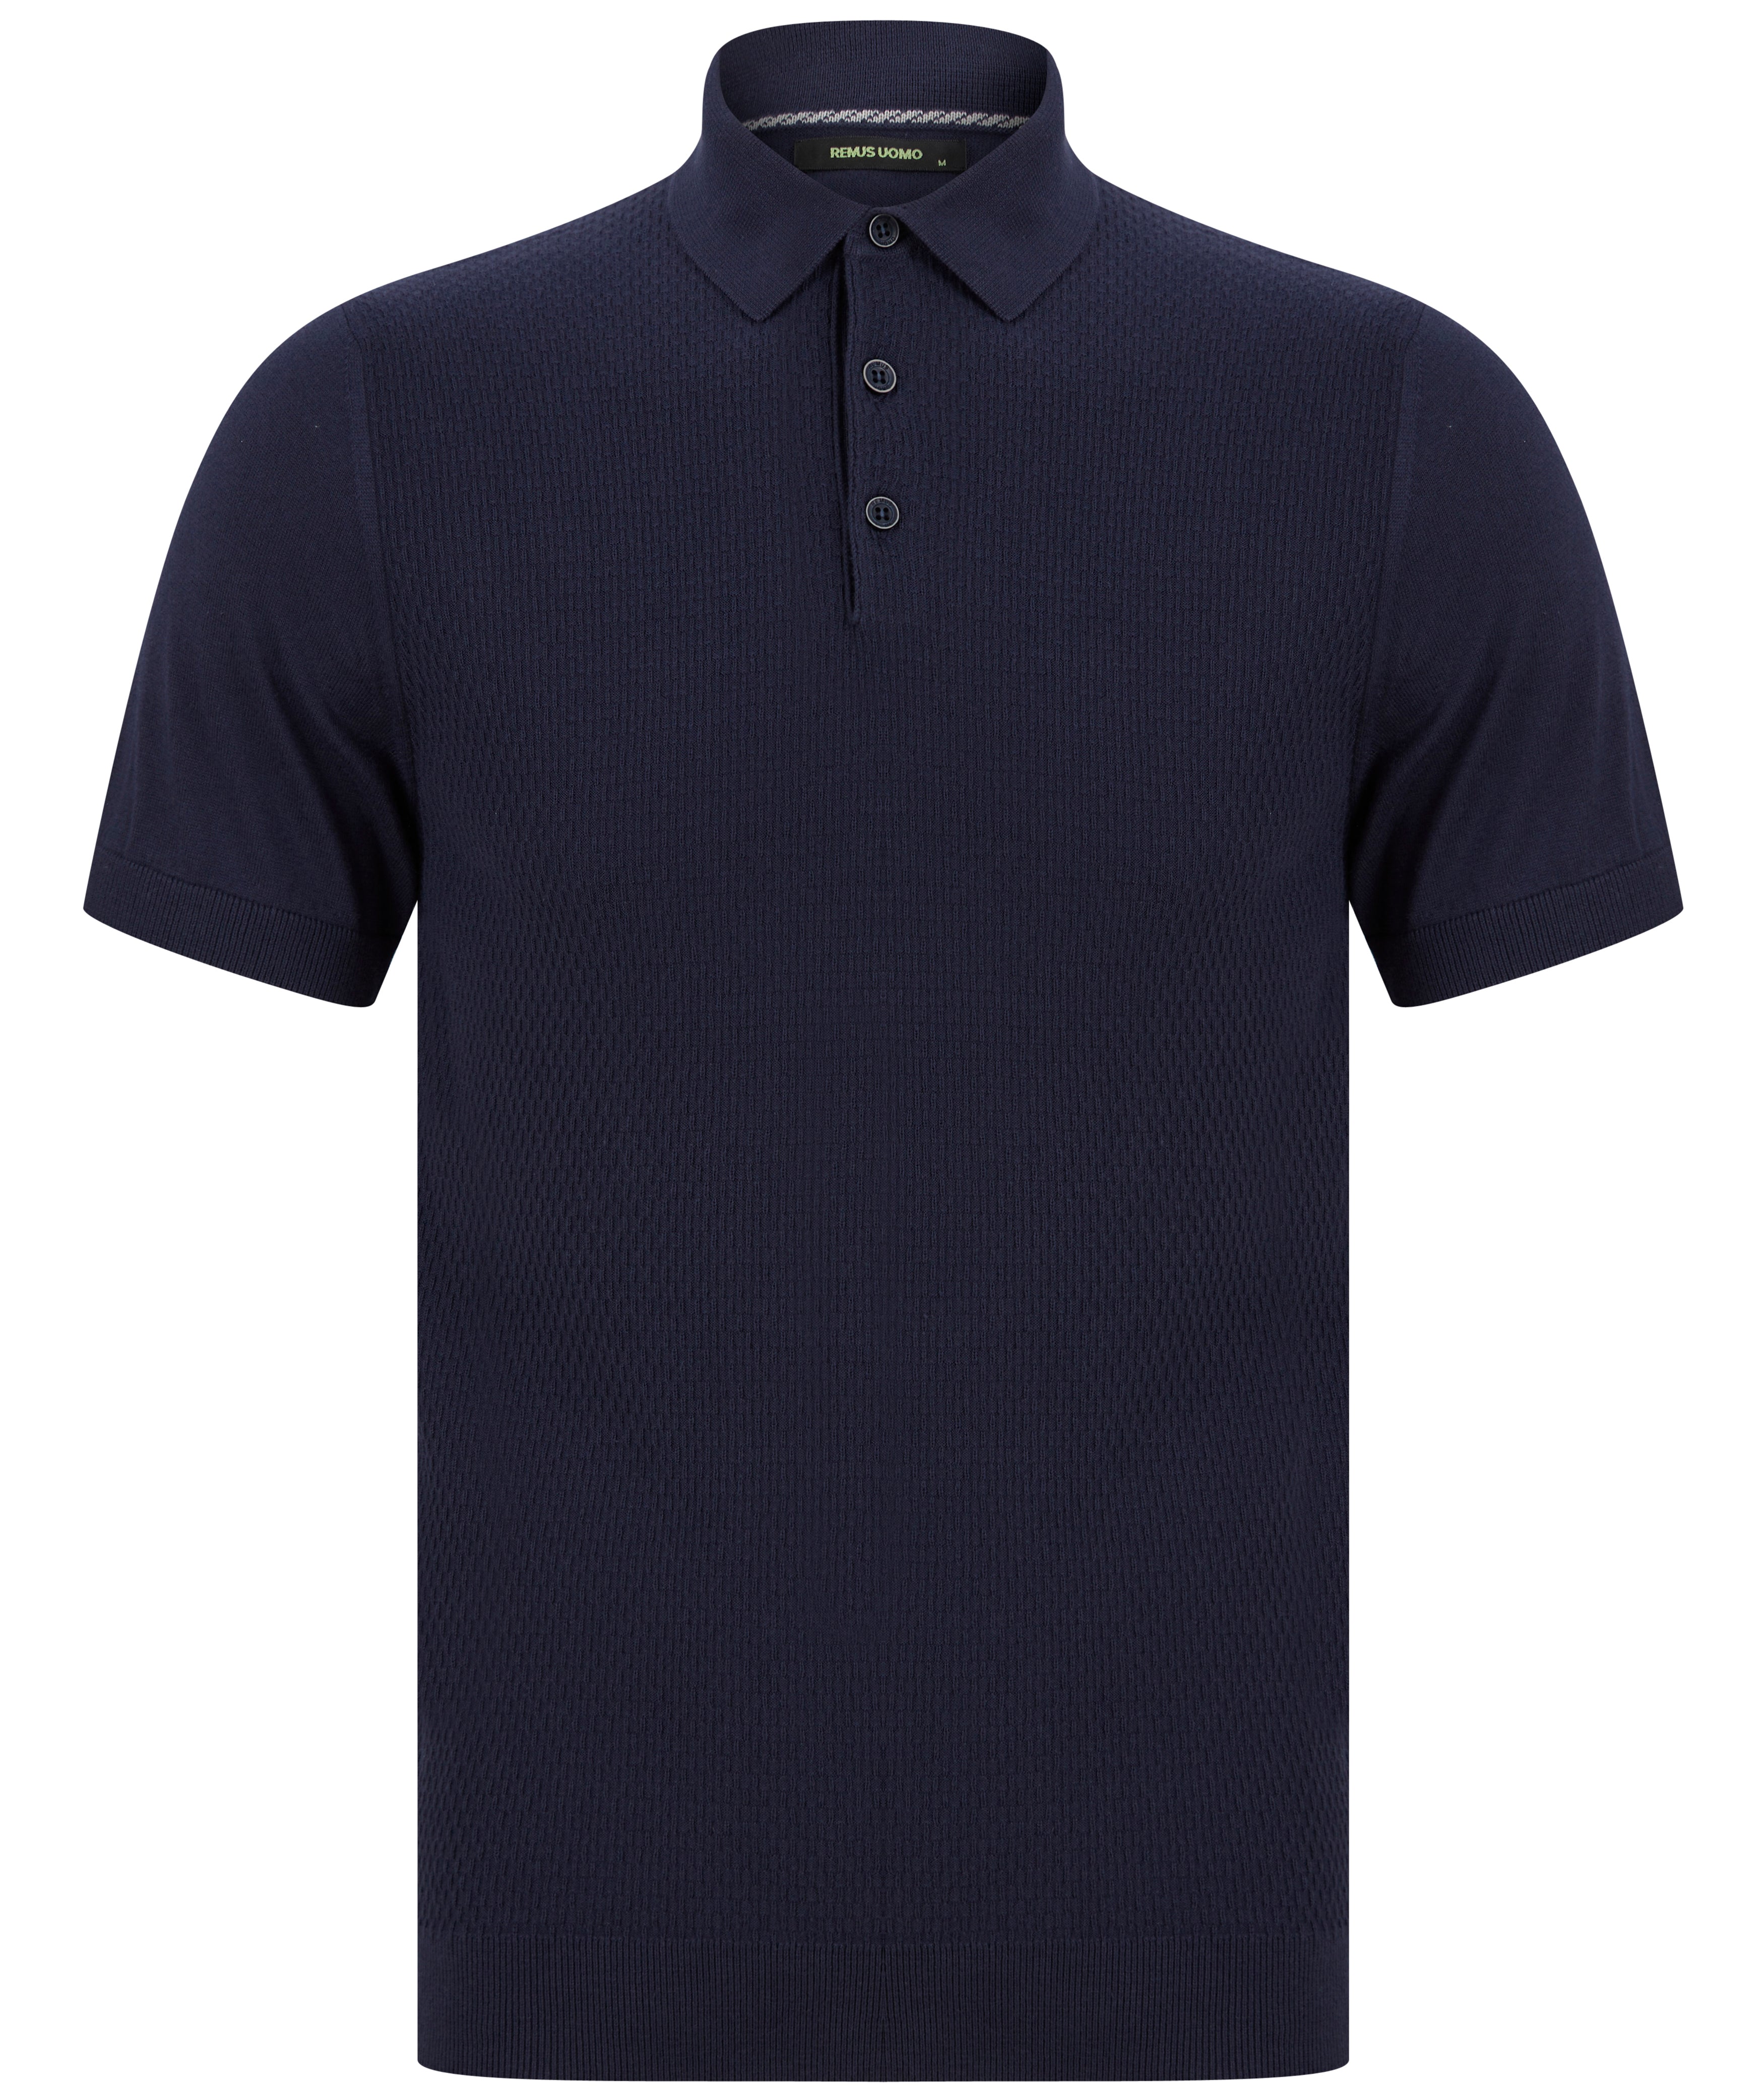 Load image into Gallery viewer, Remus Slim Fit Knit Polo Navy
